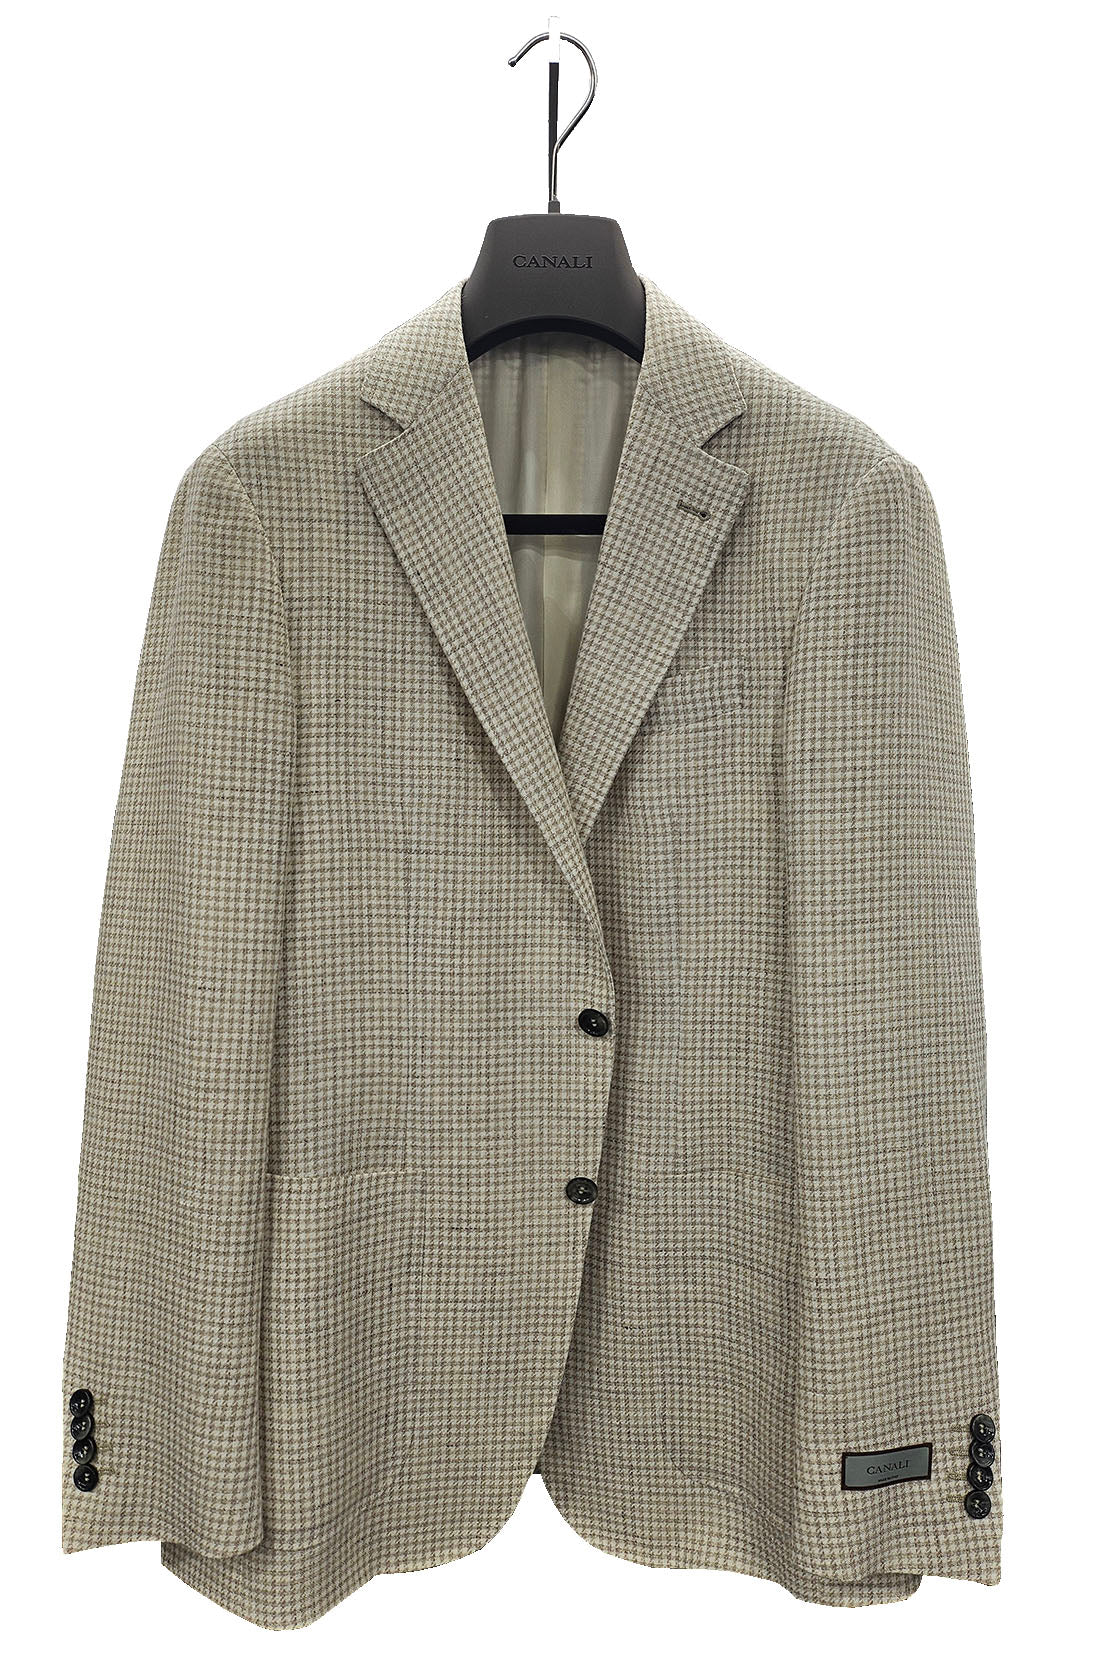 CANALI - Beige and Sand Houndstooth Linen and Wool KEI 2 Button Jacket 13275-CF02002.701